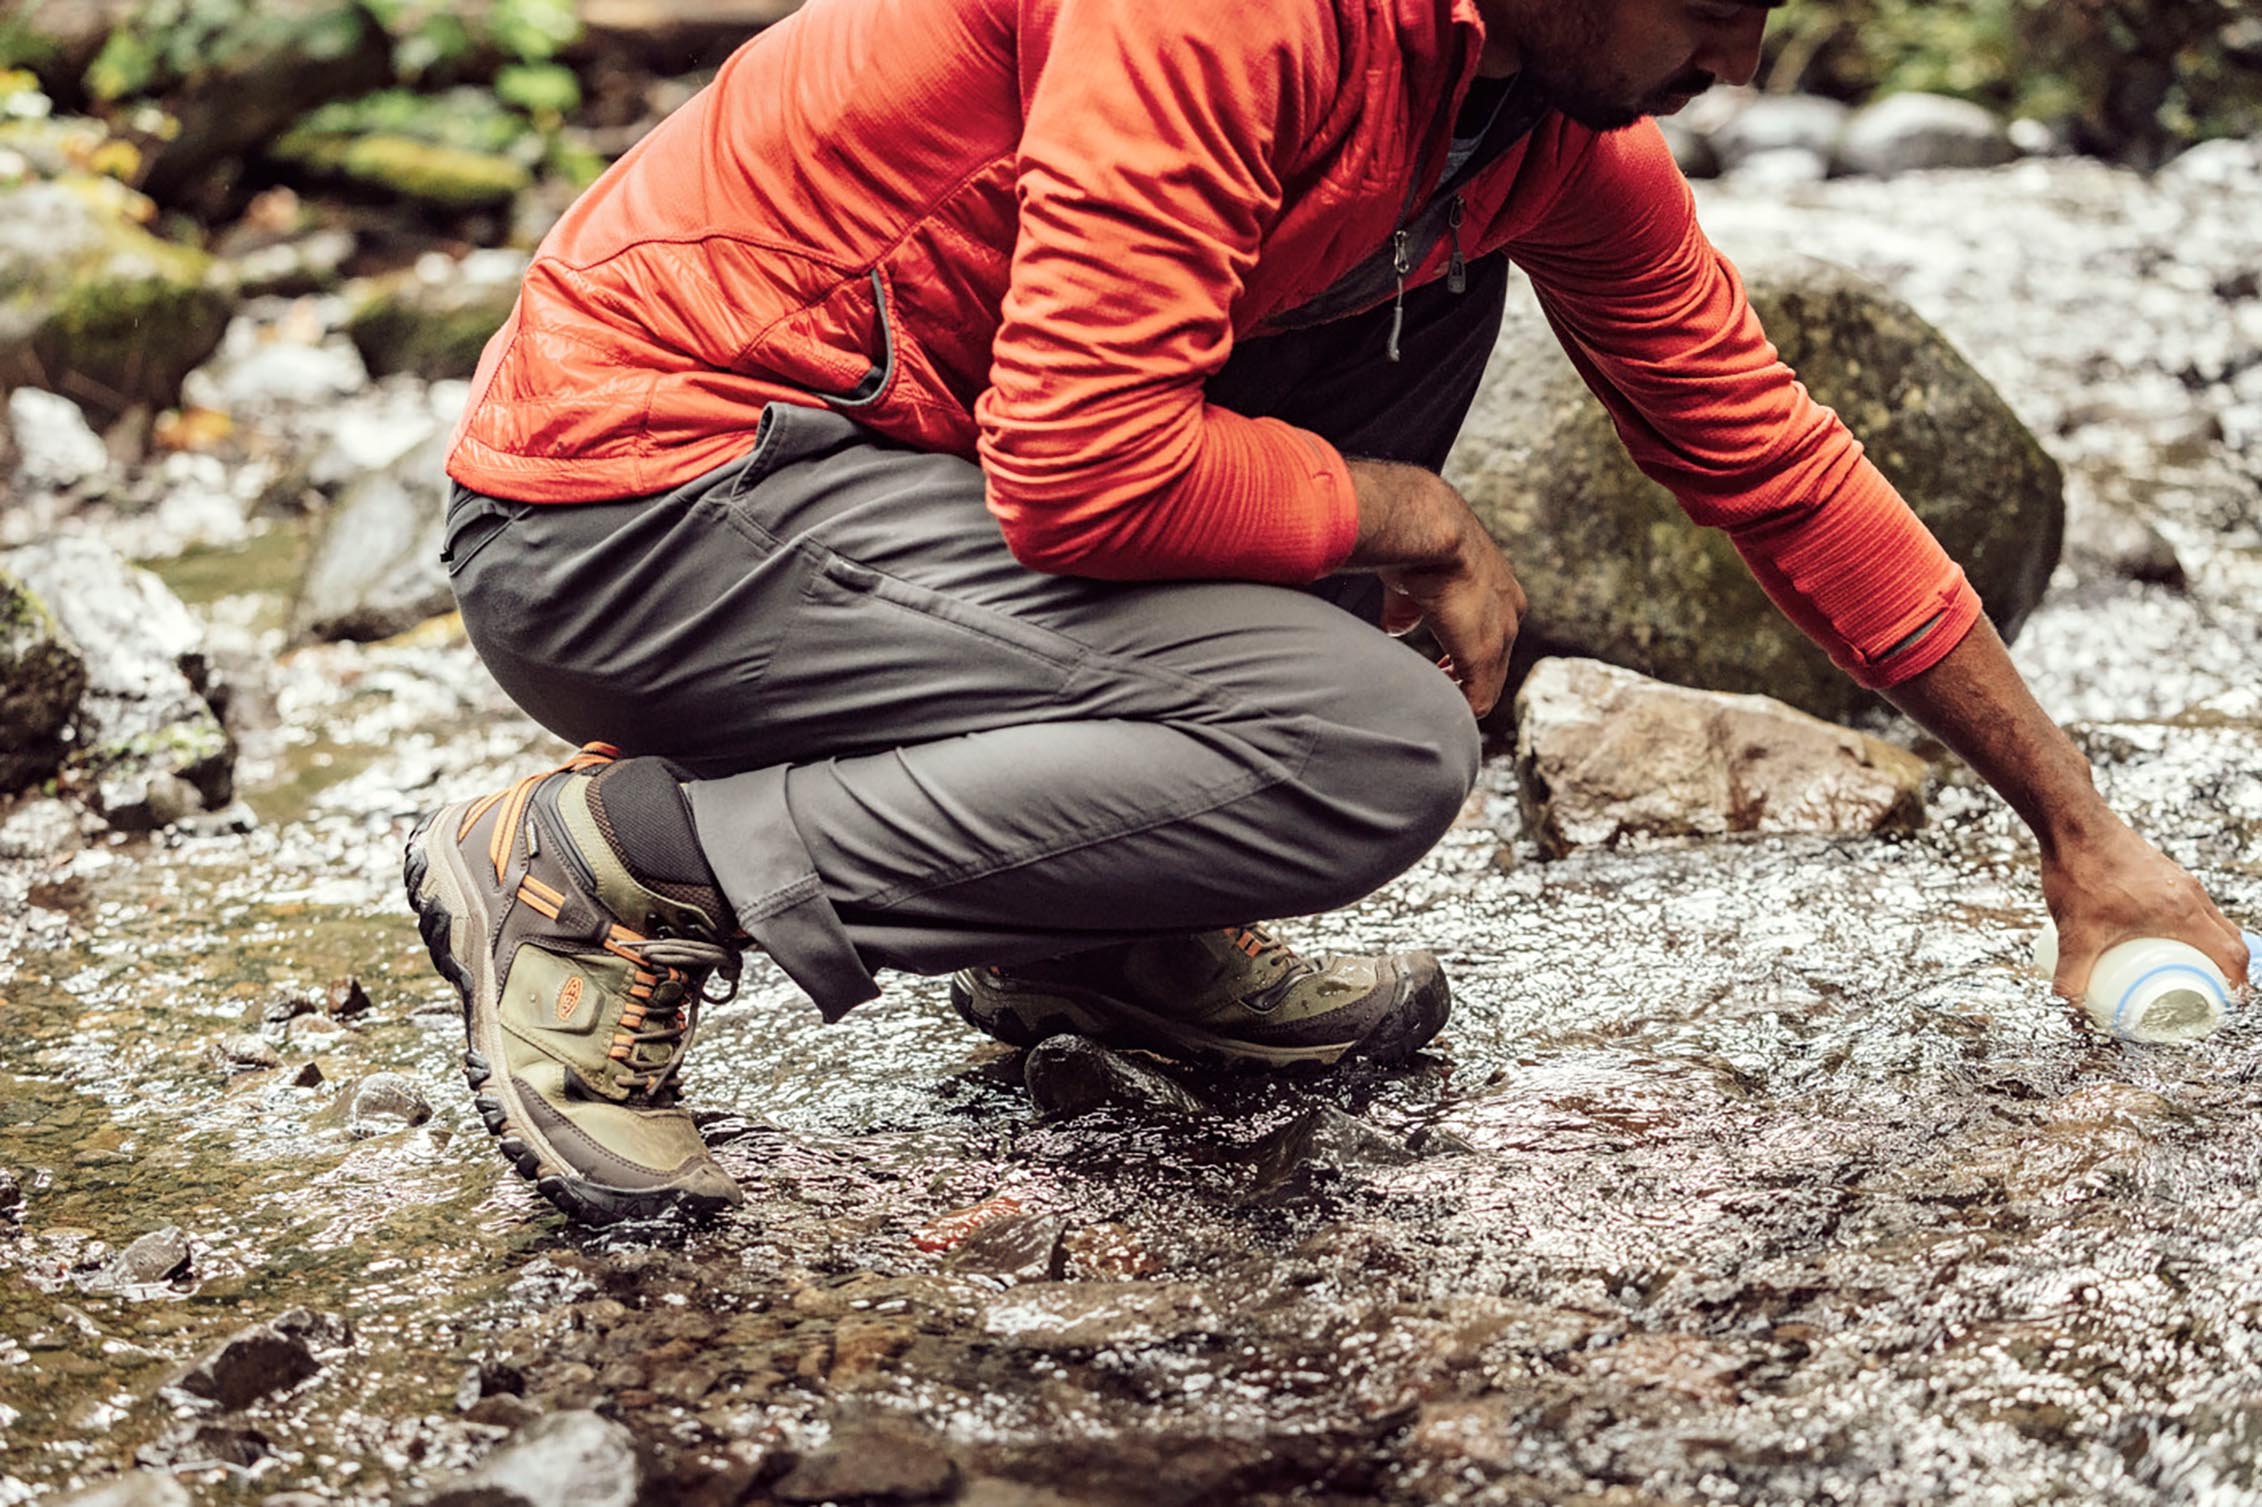 KEEN-parison: Which Waterproof Hiking Boots?